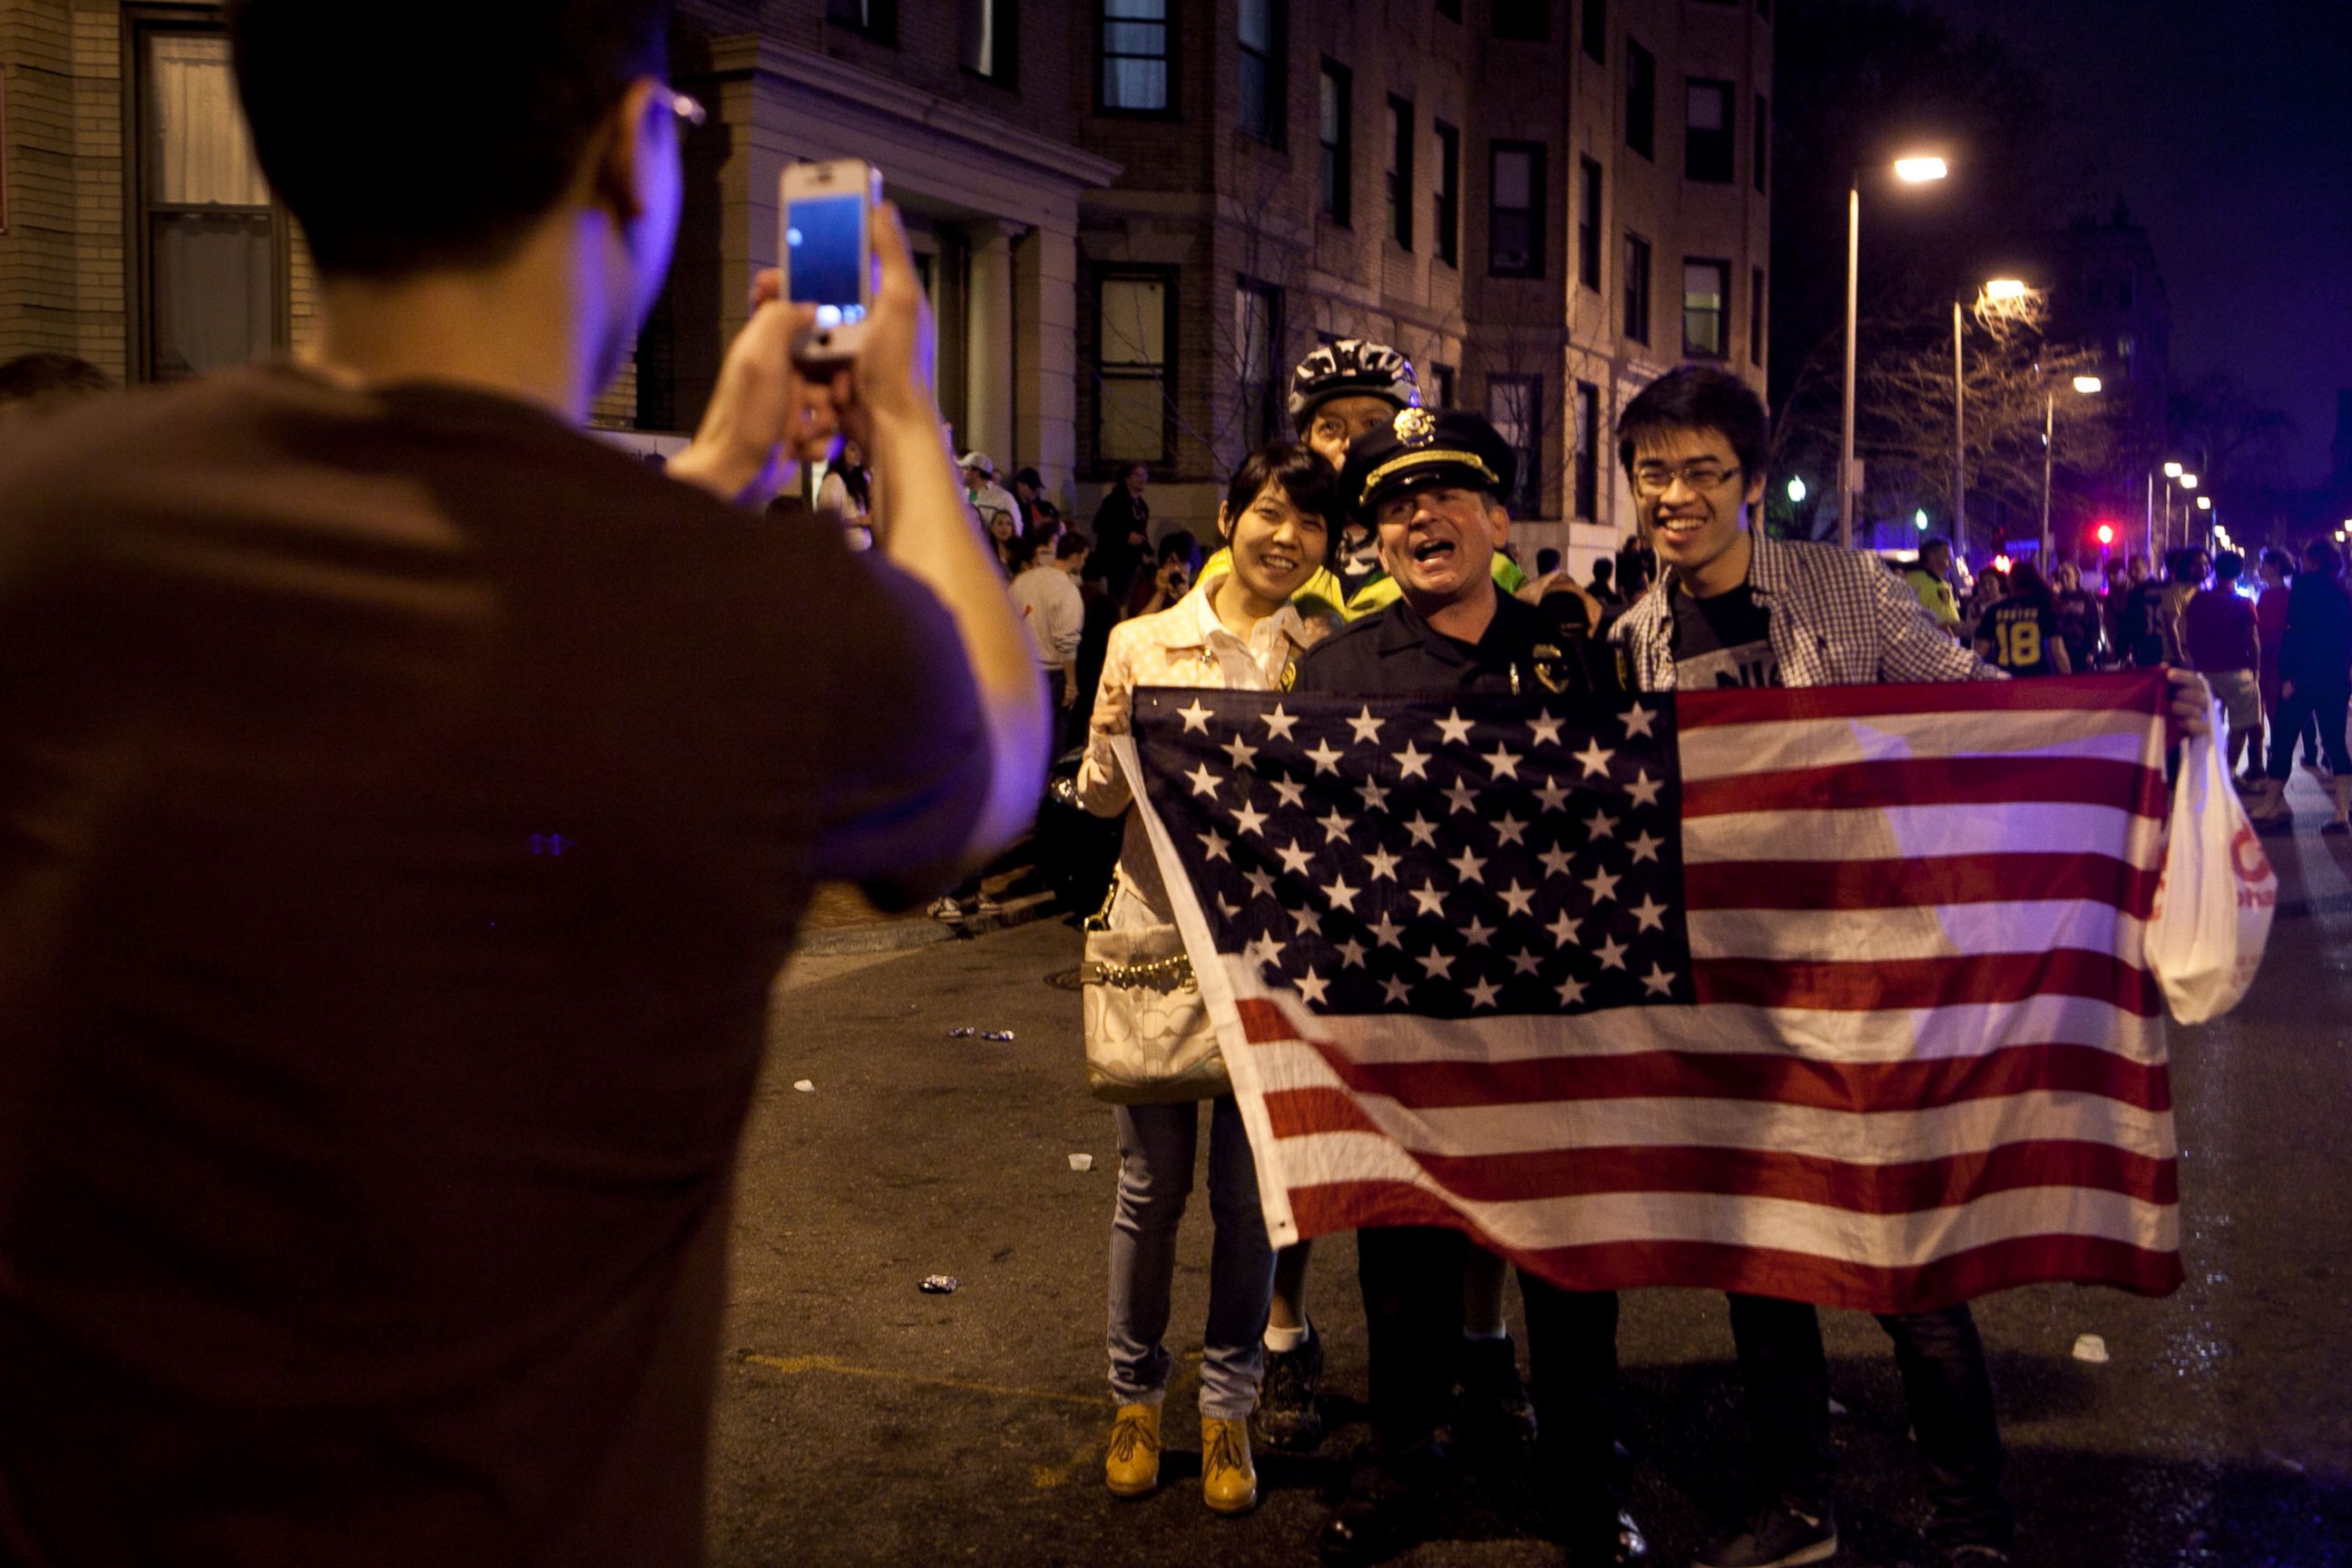 PHOTO: A few of the estimated 200 people who poured onto Hemingway Street in the Fenway neighborhood to celebrate after the announcement earlier of the capture of the second Boston Martathon bombing suspect celebrate April 19, 2013 in Boston, Mass.